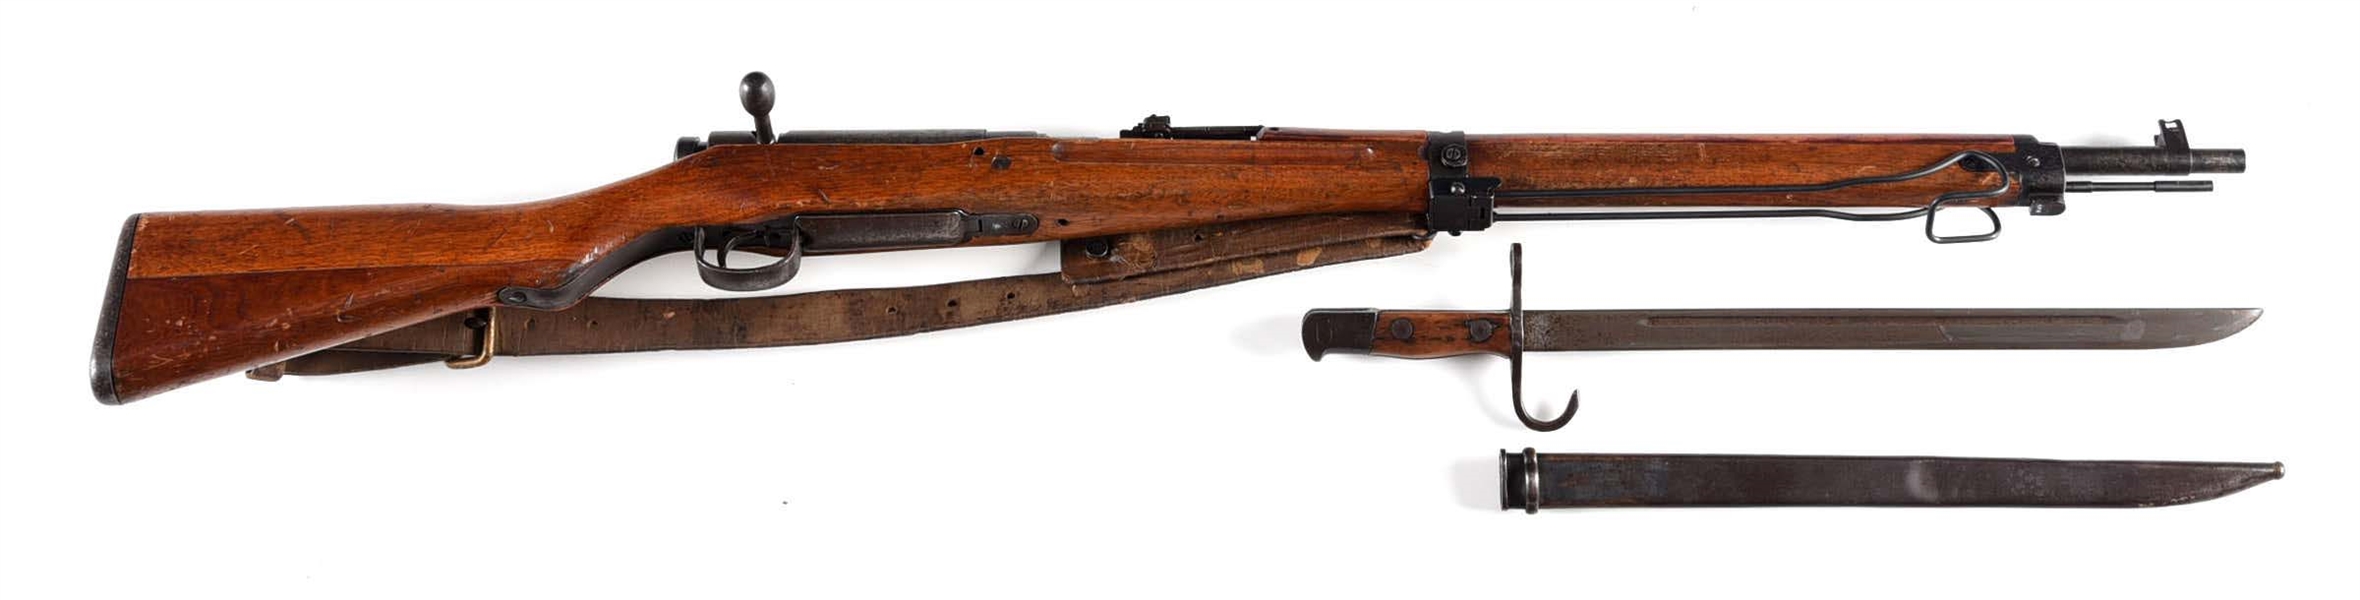 (C) NAGOYA SERIES 5 TYPE 99 BOLT ACTION RIFLE WITH INTACT MUM.